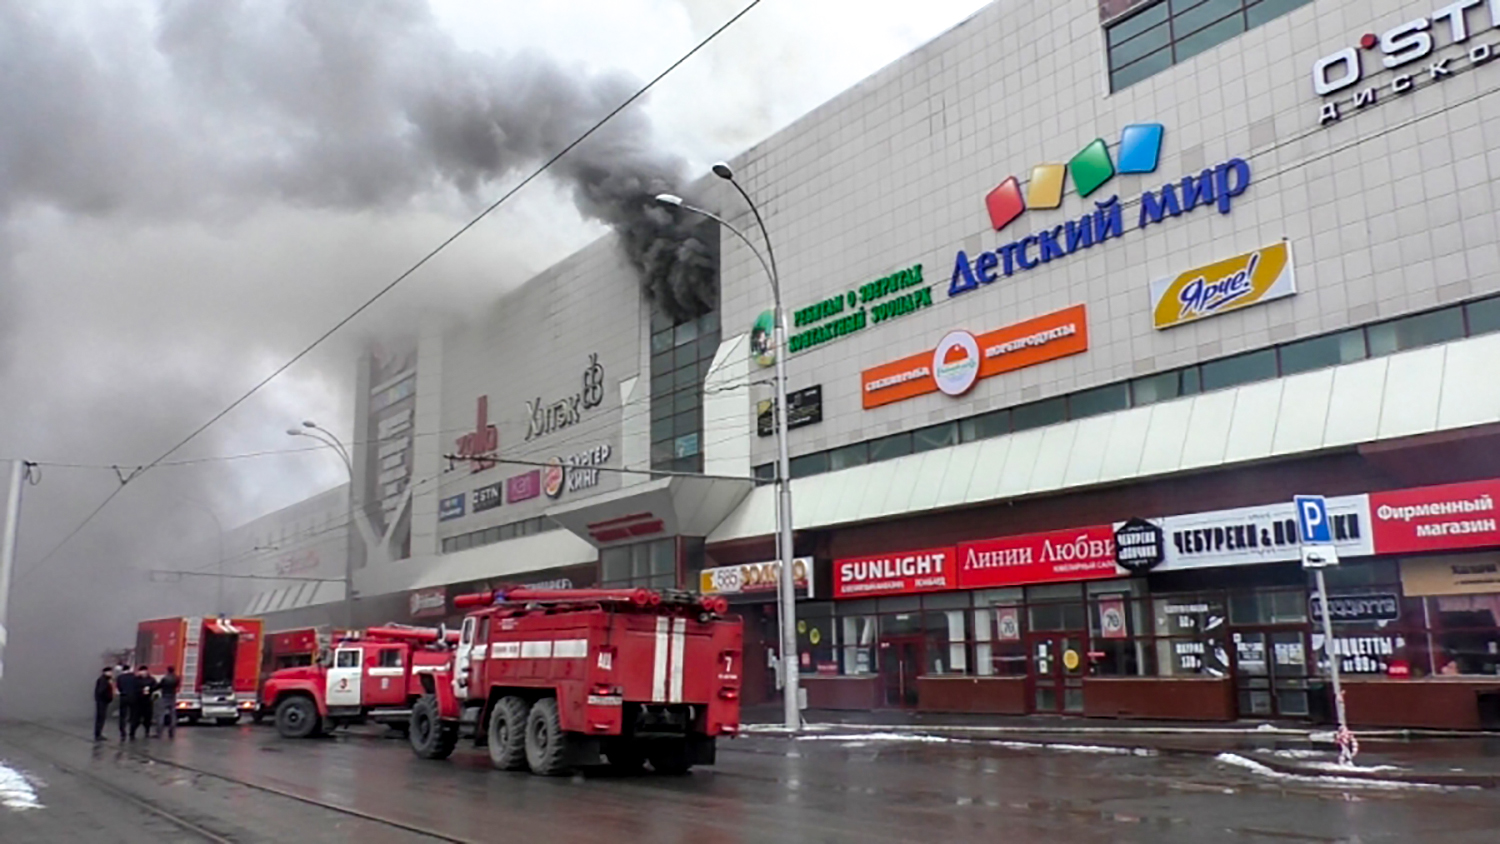 This handout picture released by The Russian Emergency Situations Ministry on March 25, 2018, shows emergency vehicles as they gather outside a burning shopping centre in Kemerovo. Five people including a child have died and another 30 were wounded in a major fire in a Siberian shopping centre, Russia's Investigative Committee said. "Three women, a child and a man have been killed" and 30 people hospitalised following the blaze in the Winter Cherry shopping centre in Kemerovo, an industrial city in central Siberia, it said in a statement.  / AFP PHOTO / RUSSIAN EMERGENCY SITUATIONS MINISTRY / HO / RESTRICTED TO EDITORIAL USE - MANDATORY CREDIT "AFP PHOTO / RUSSIAN EMERGENCY SITUATIONS MINISTRY" - NO MARKETING NO ADVERTISING CAMPAIGNS - DISTRIBUTED AS A SERVICE TO CLIENTS. RUSSIA'S EMERGENCY SITUATIONS MINISTRY